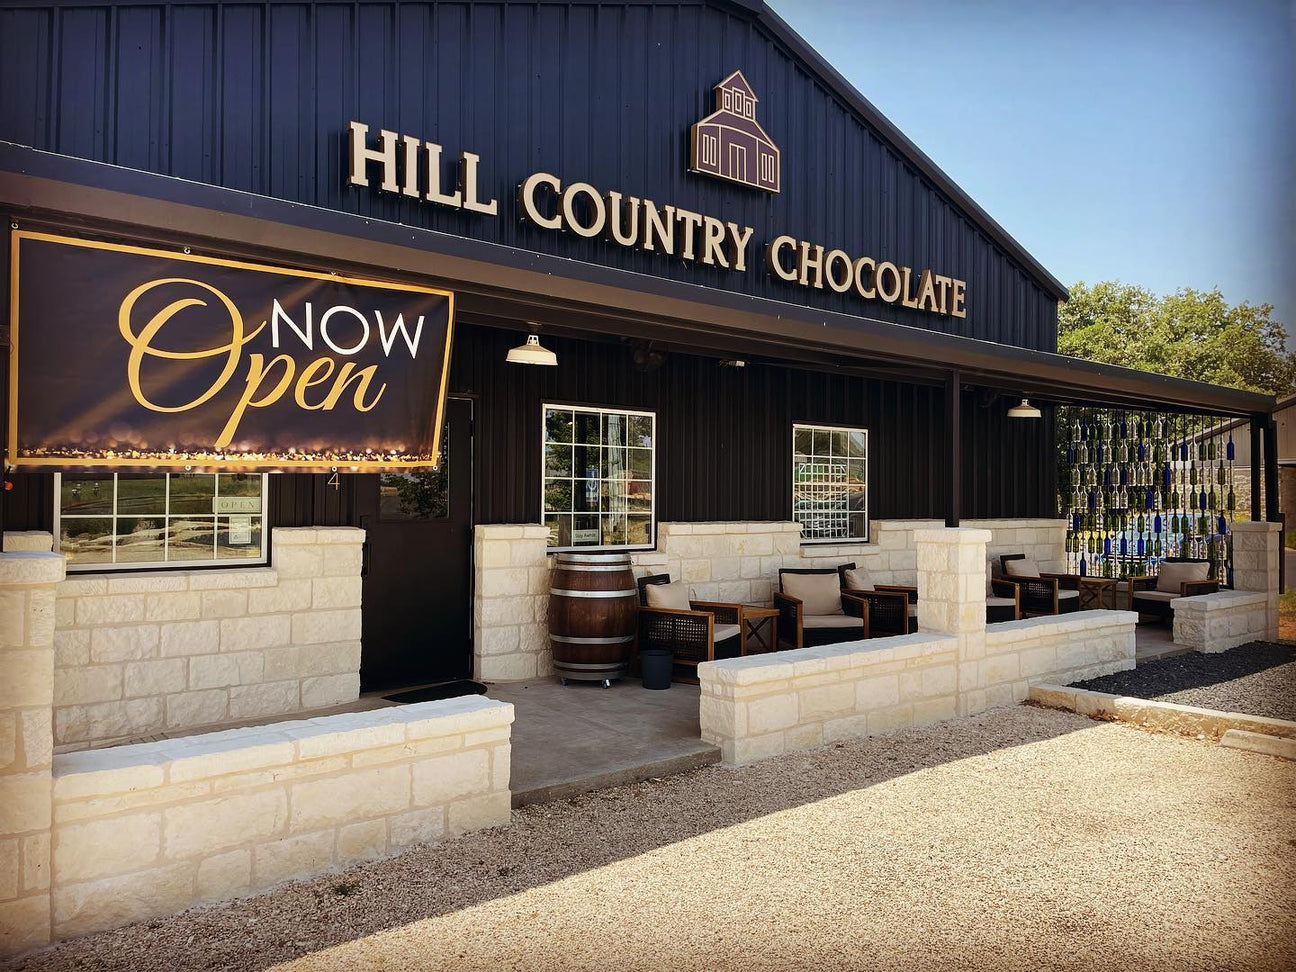 Hill country chocolates is now open.